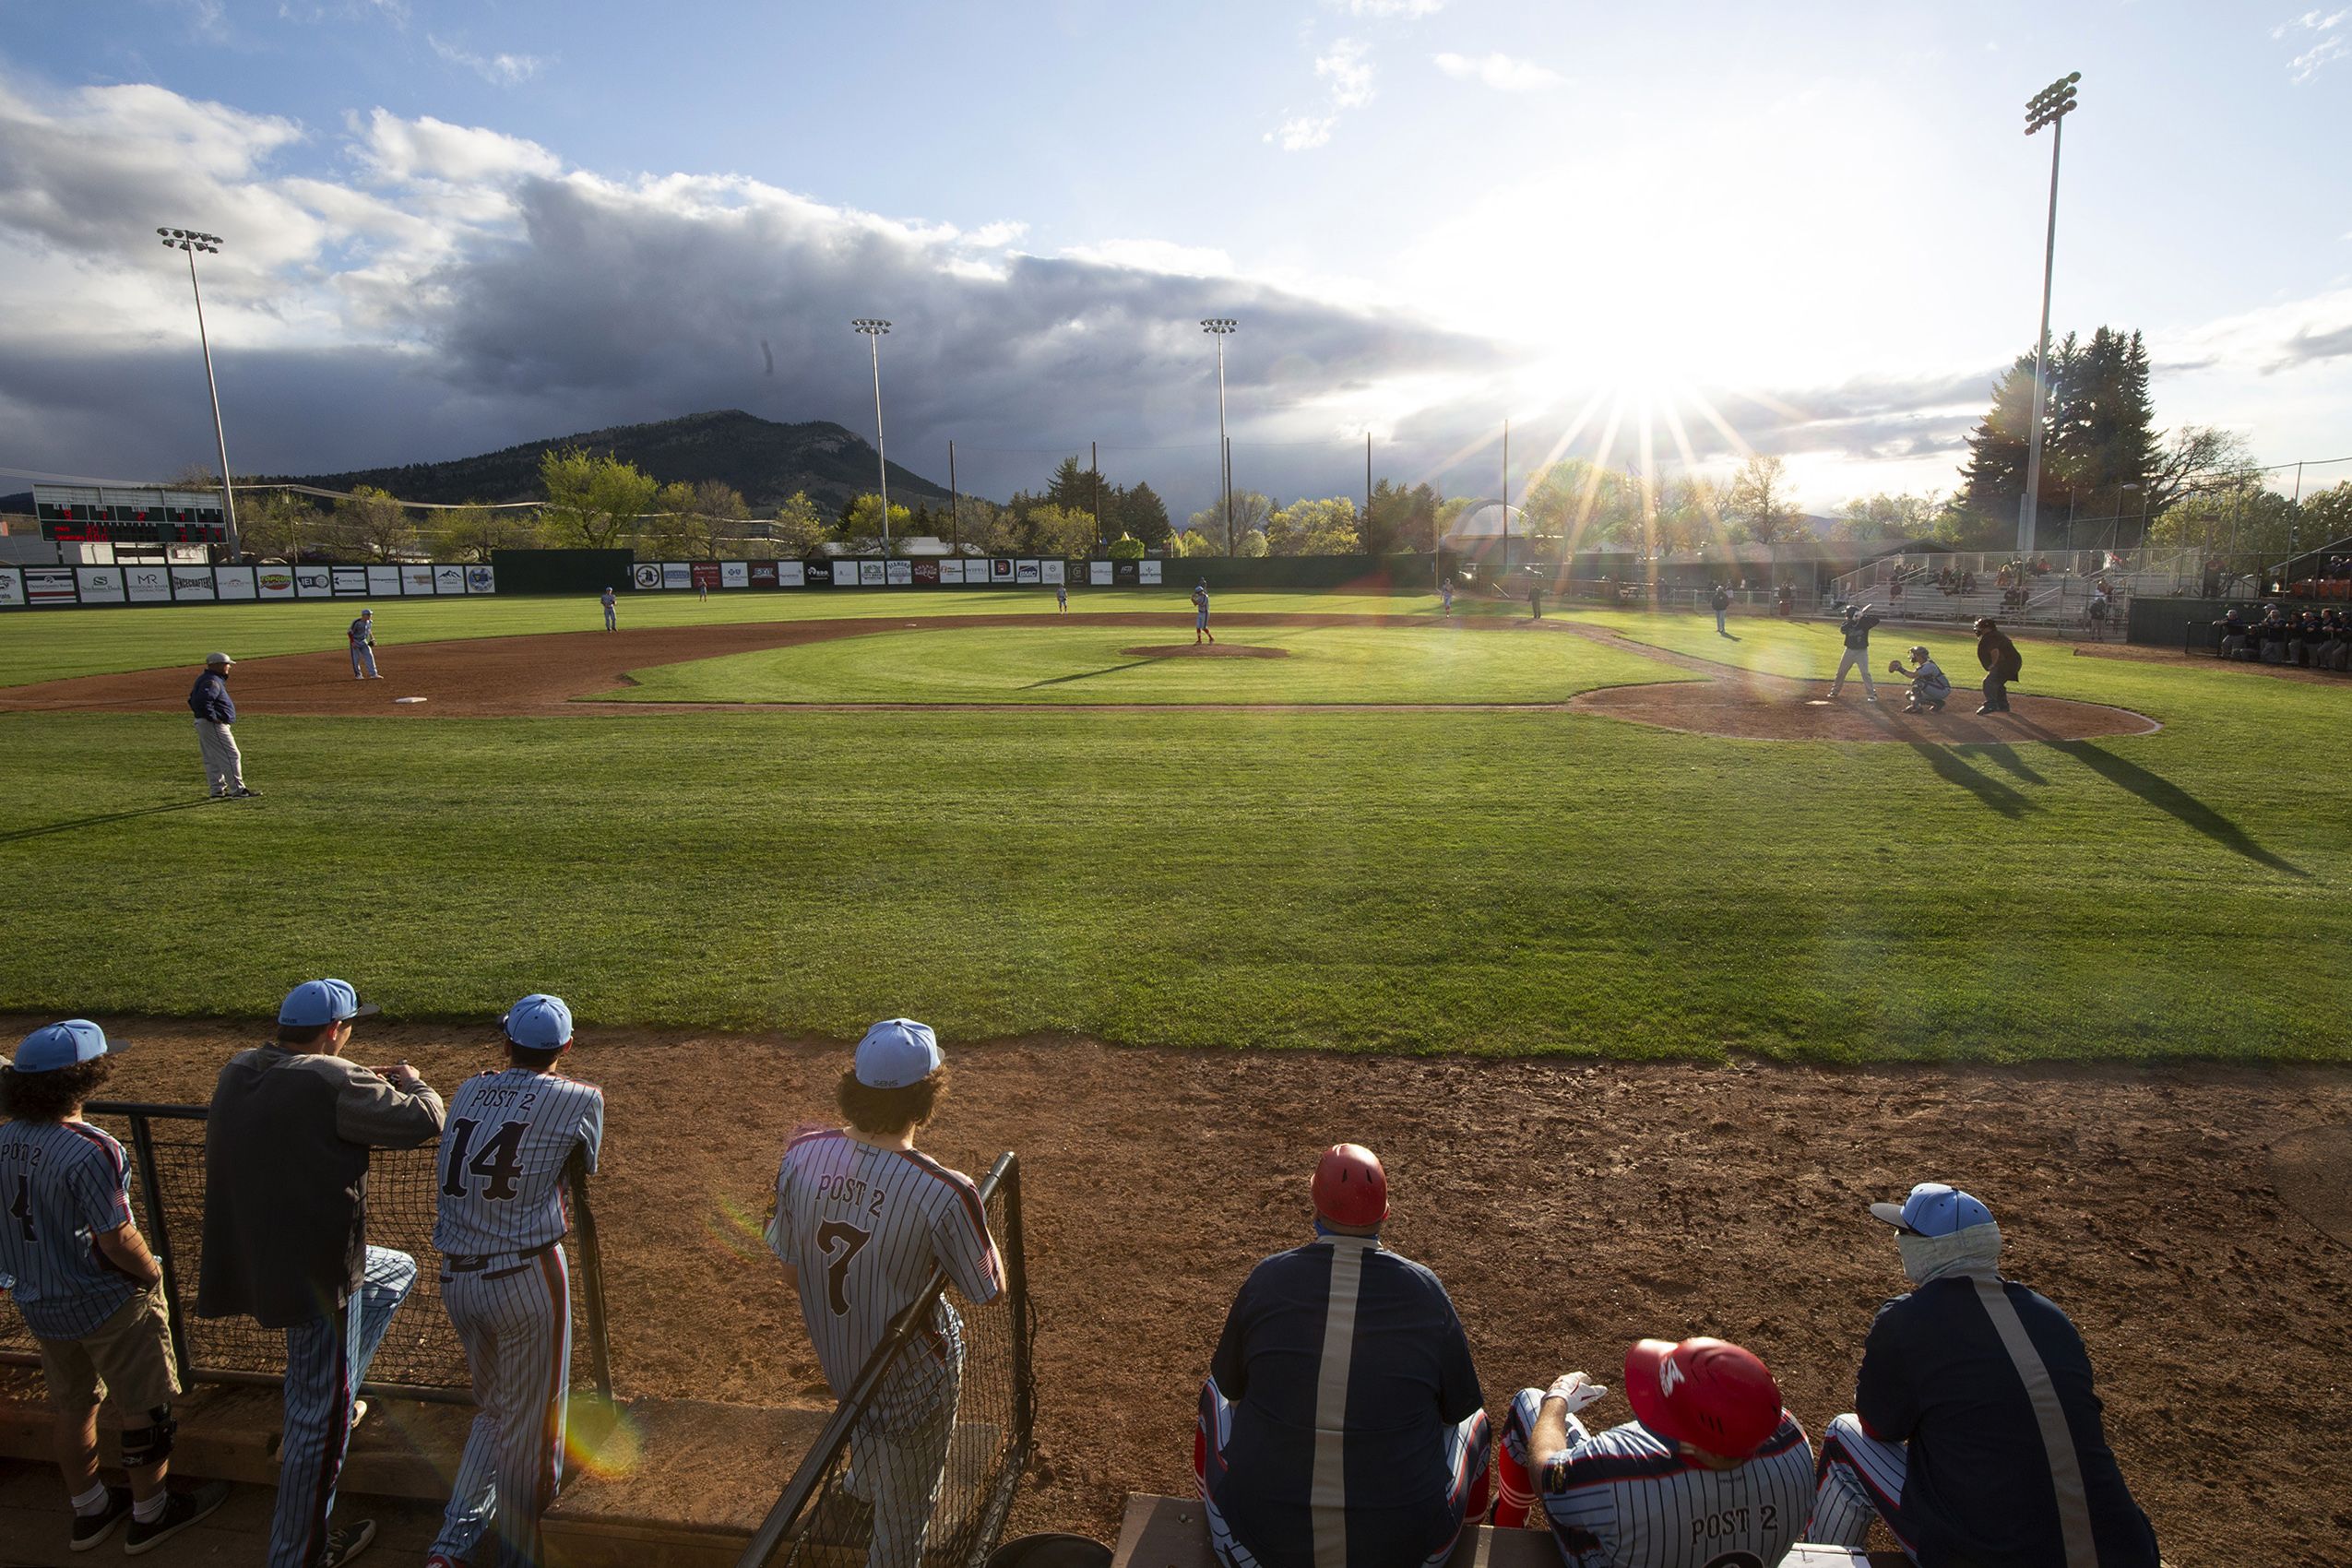 Baseball players look out at field